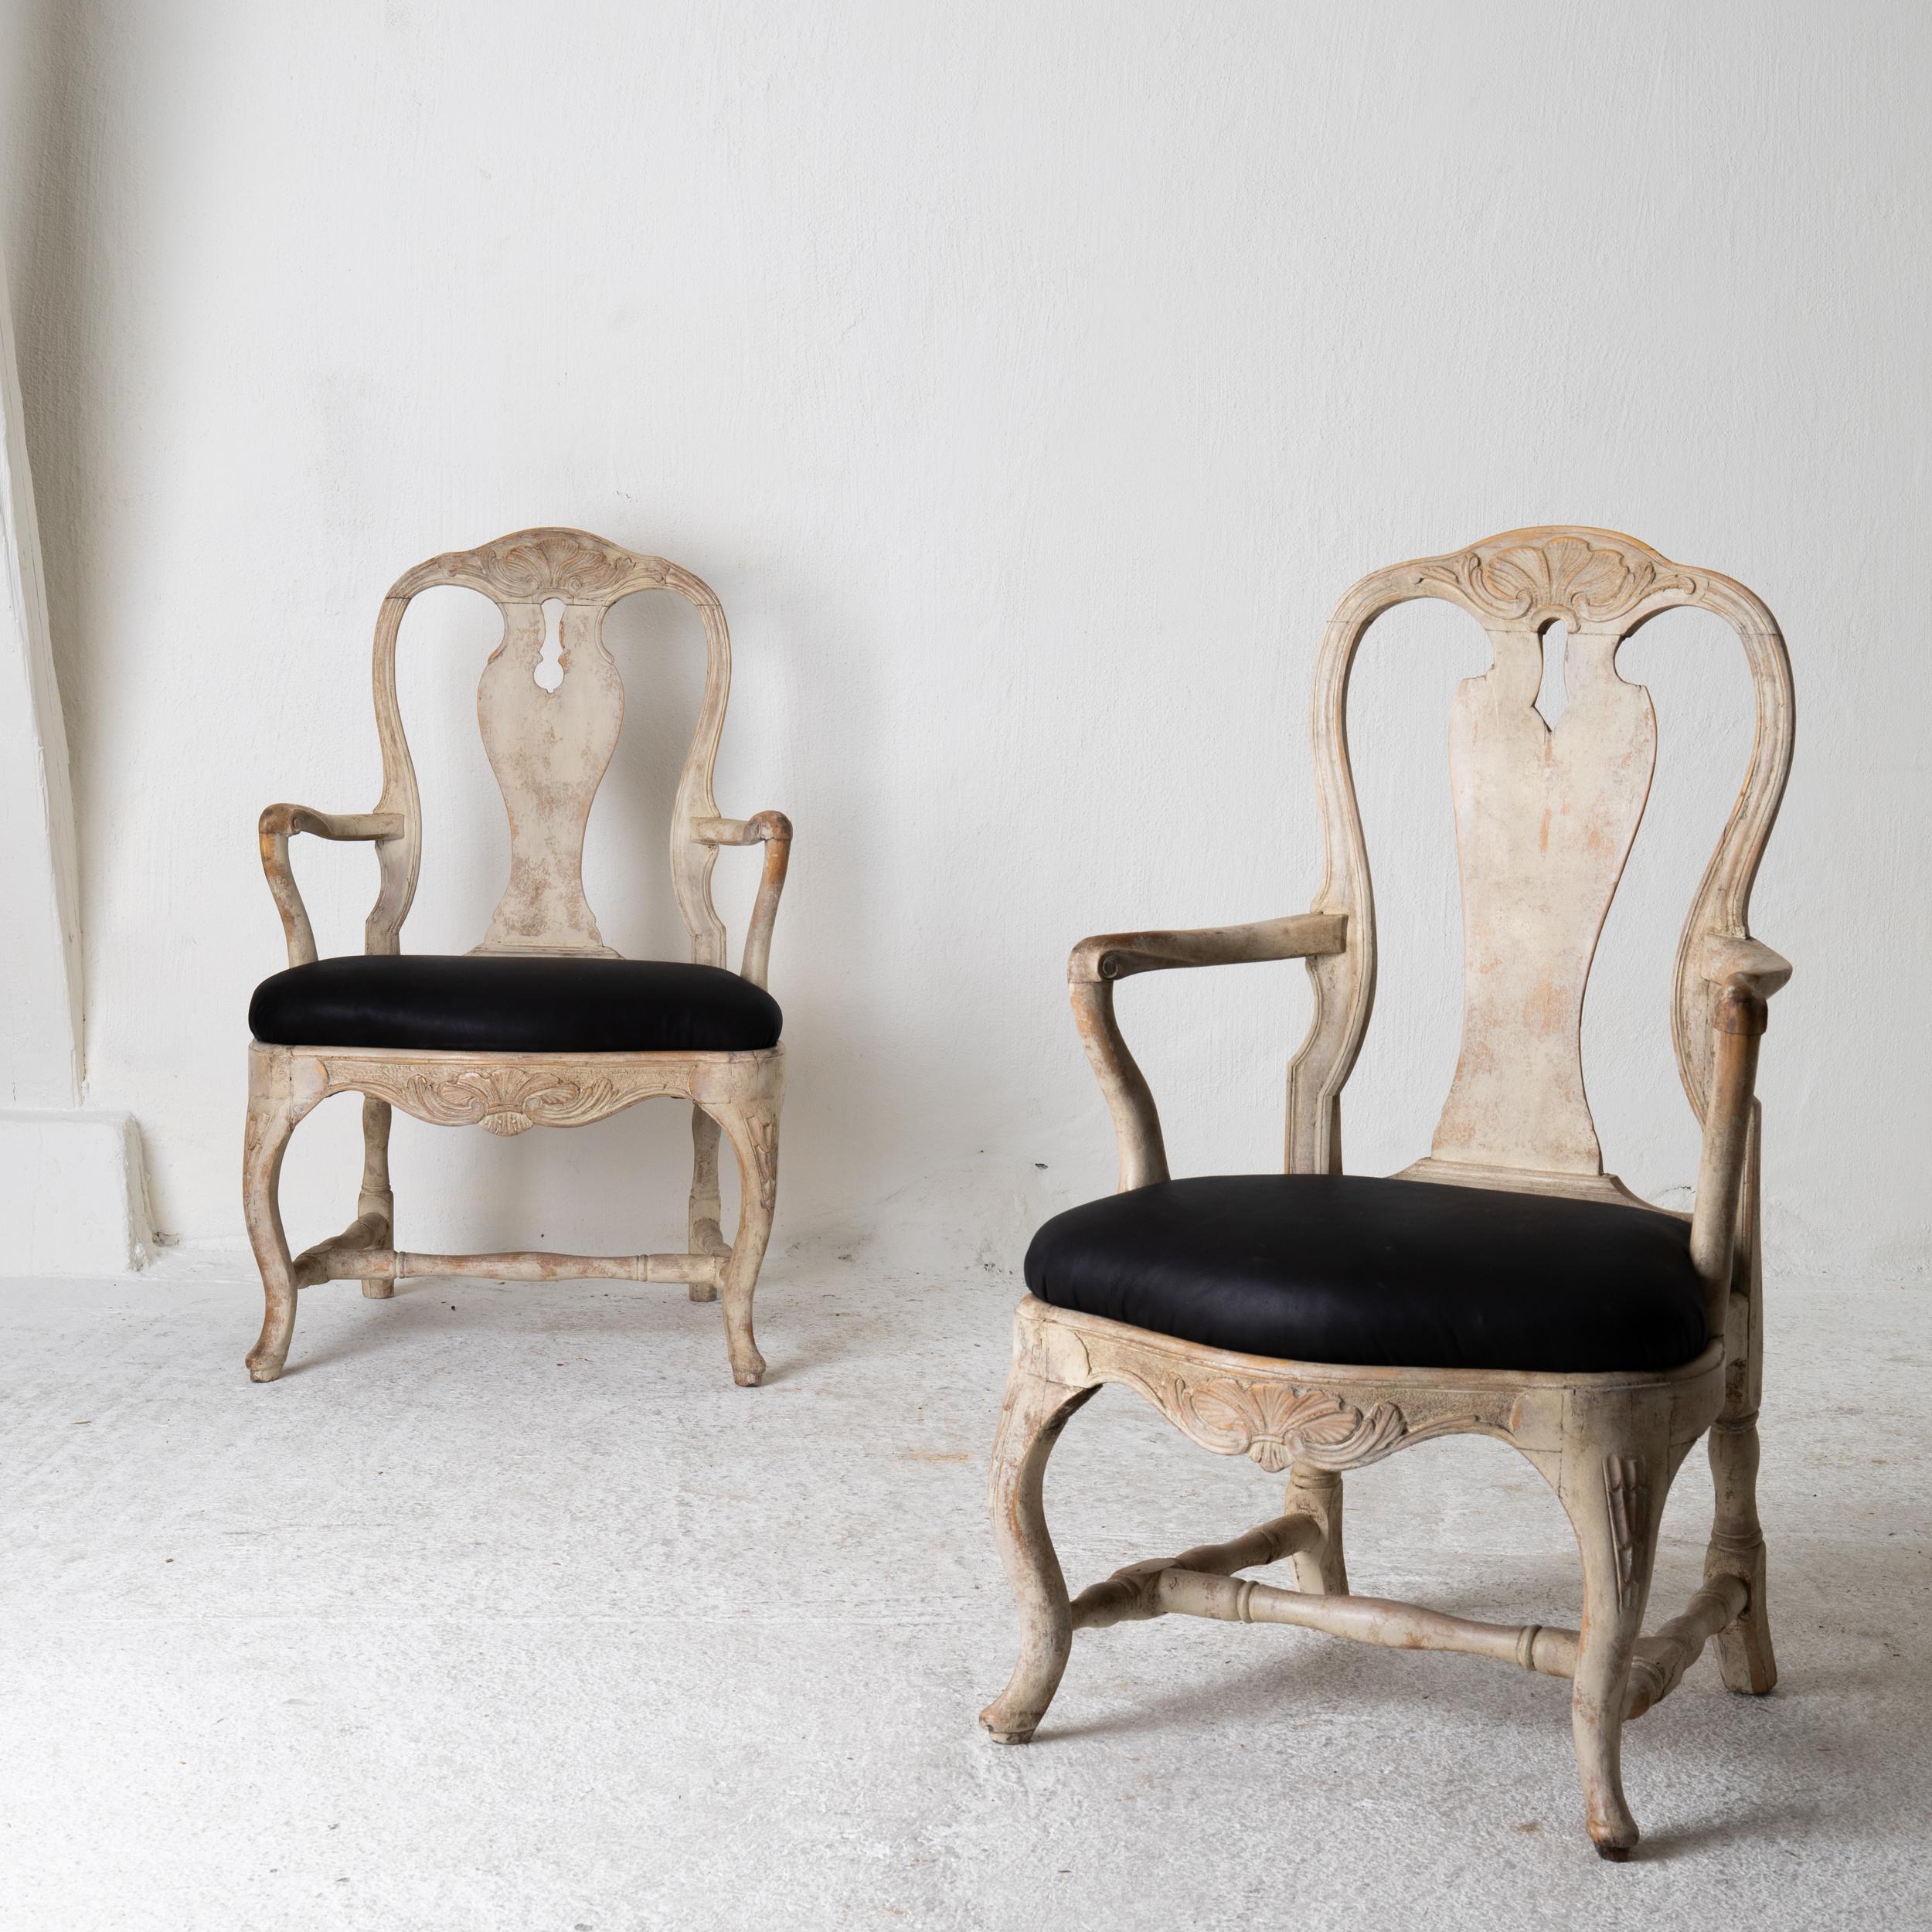 Chairs armchairs pair Swedish Rococo 1750-1775 cream white, Sweden. A pair of armchairs made during the Rococo period 1750-1775 in Sweden. Restored in a light creamy white paint. Seat upholstered in black leather. Back and frieze carved with a shell